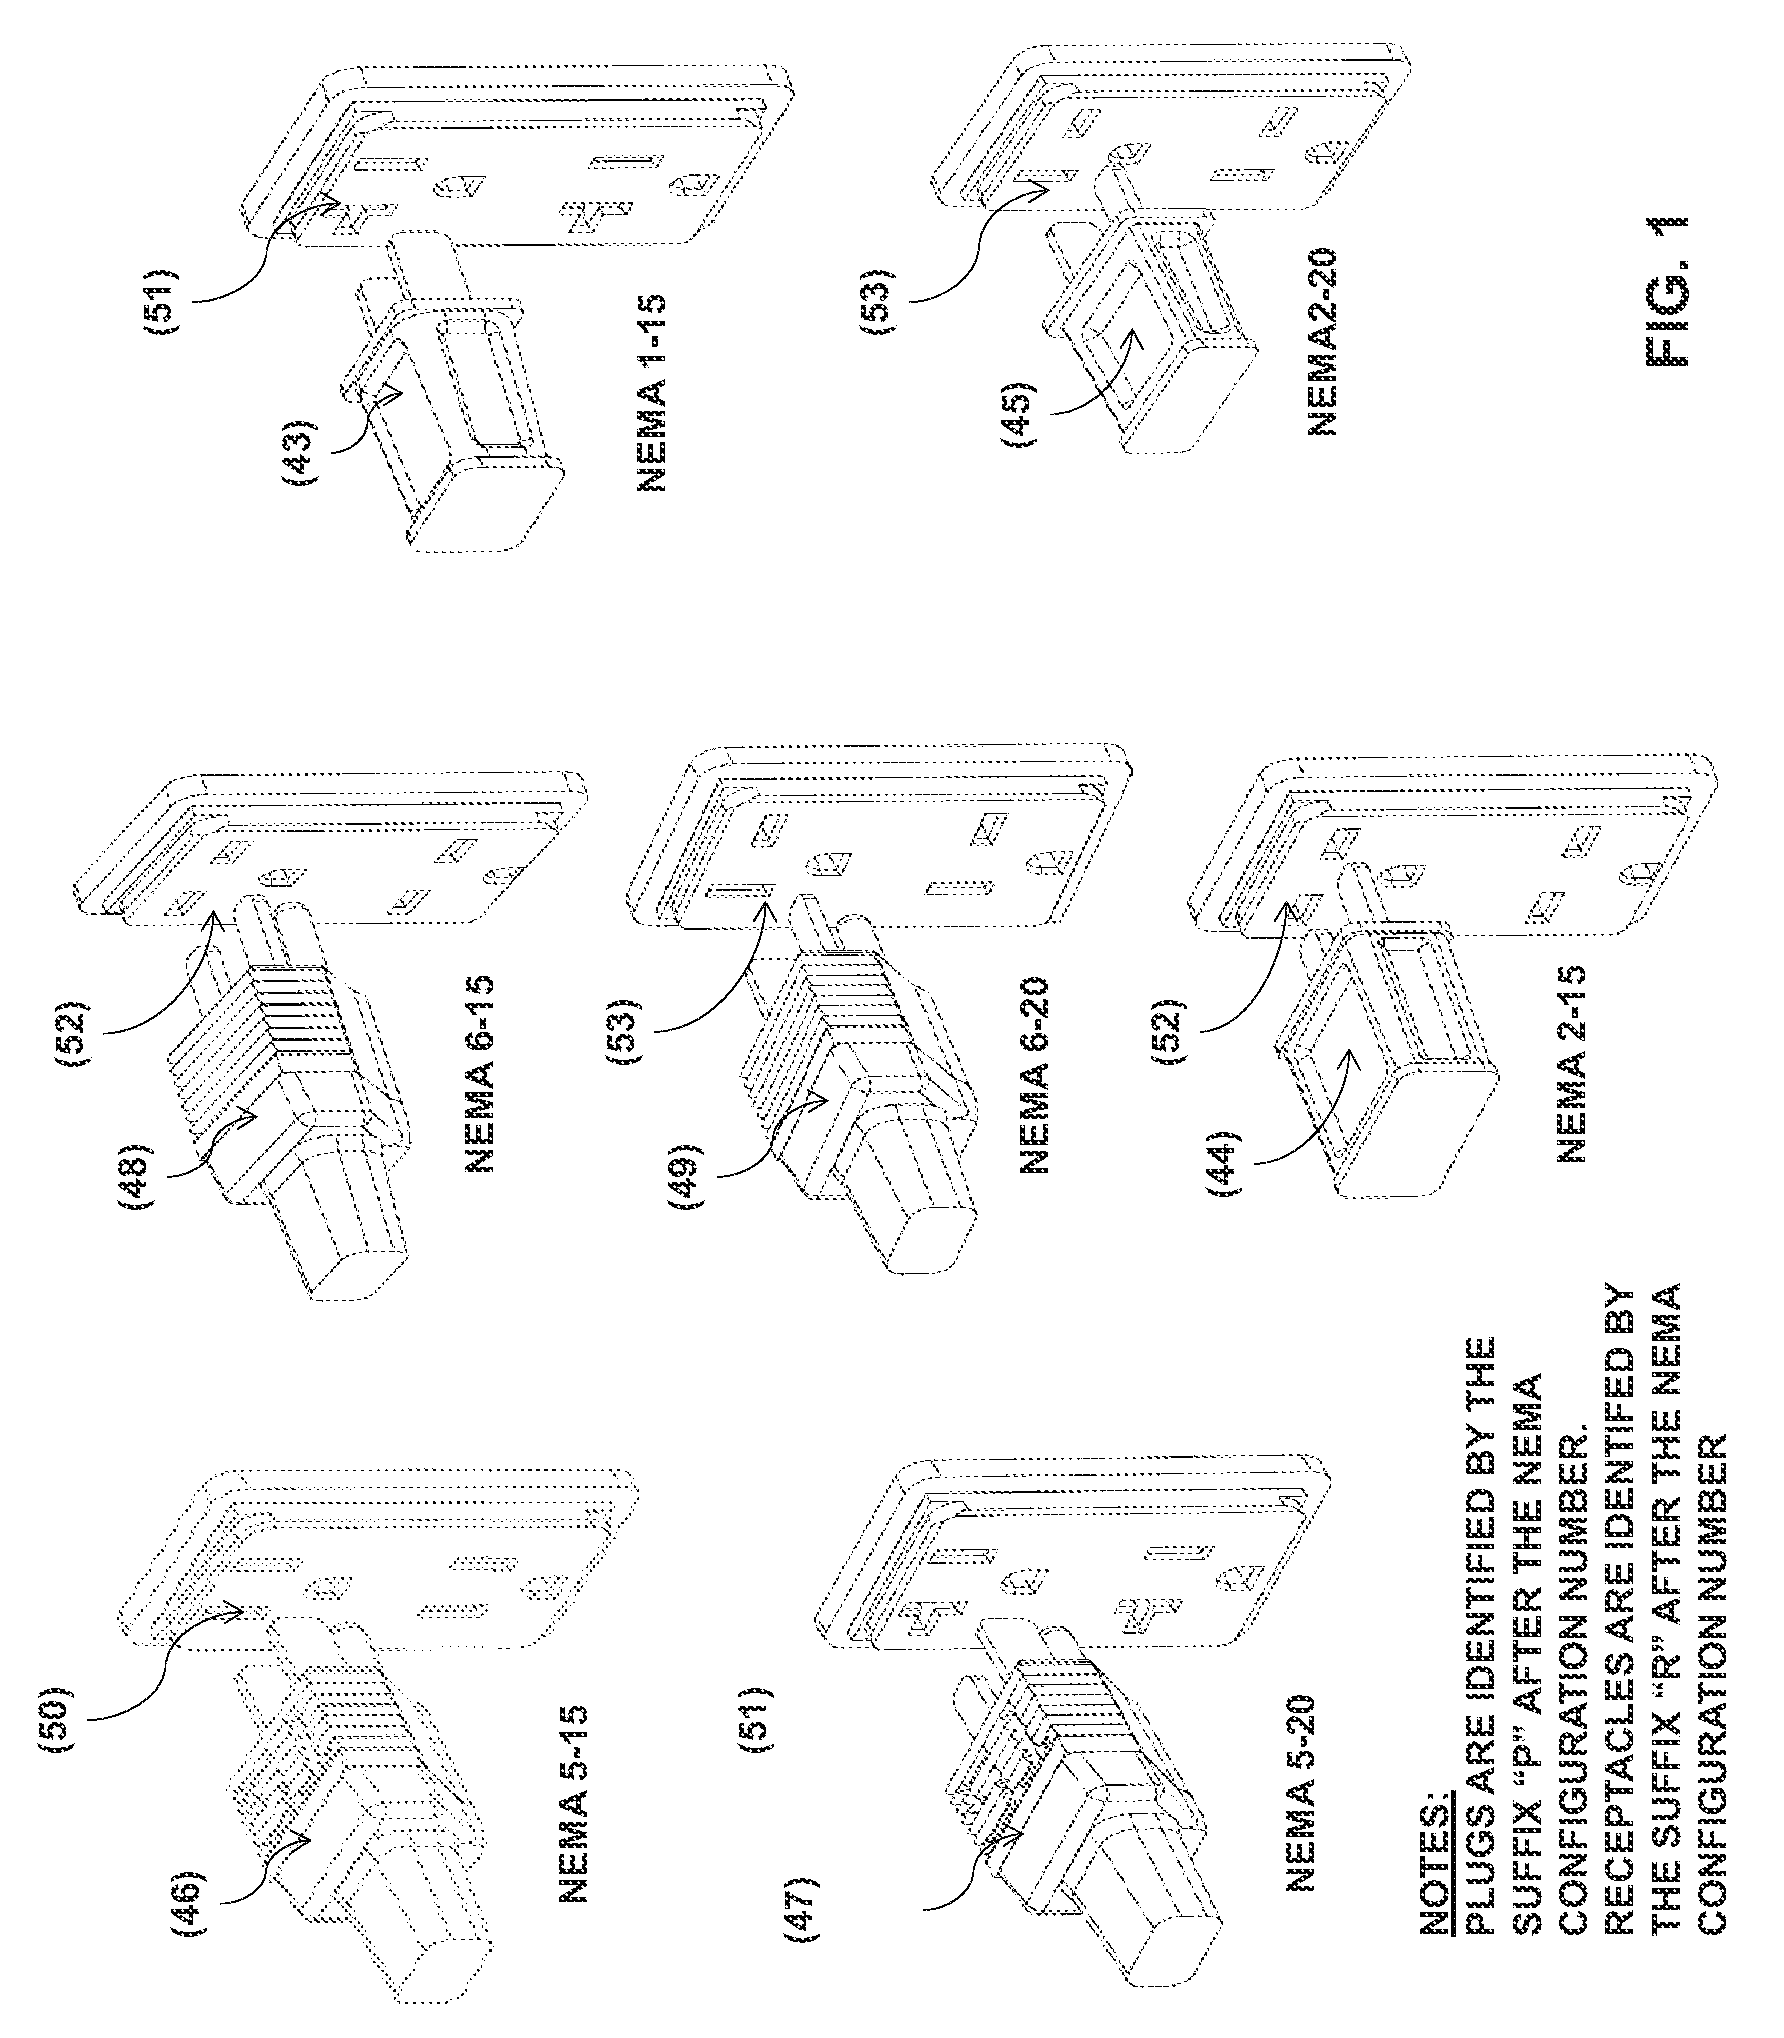 Tamper resistant shutter device for electrical receptacle outlets